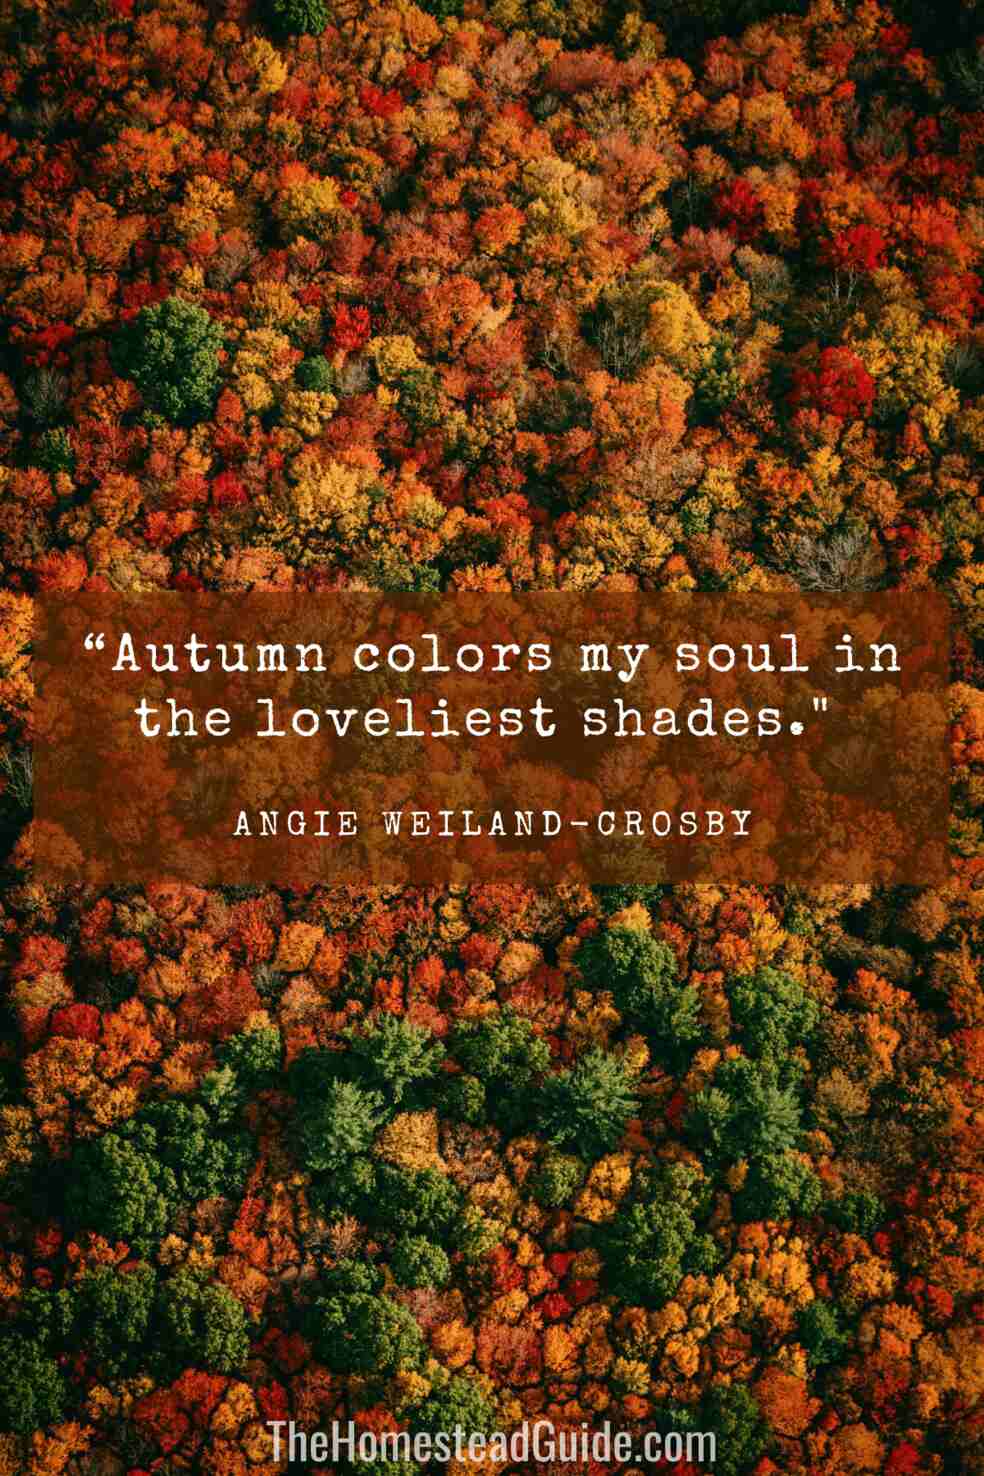 Autumn colors my soul in the loveliest shades.